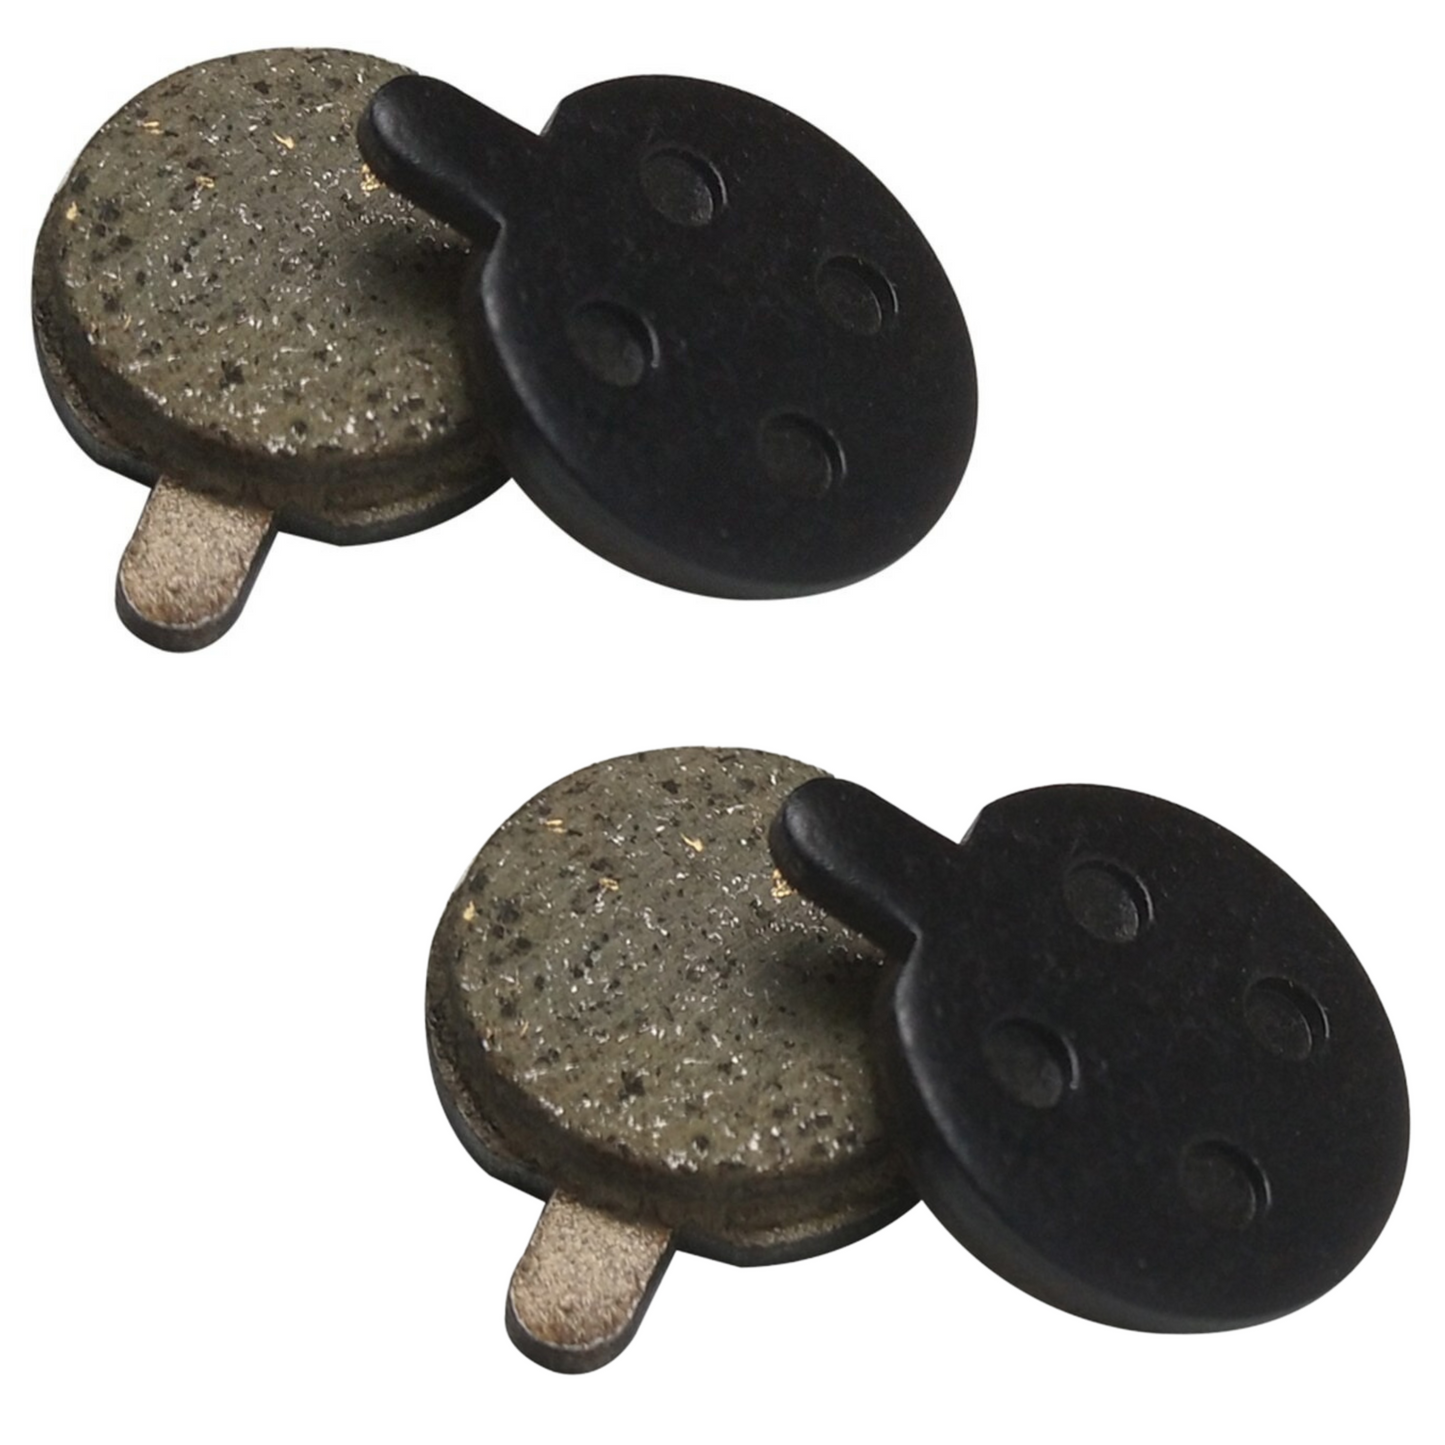 2 Pair Brake Pads Replacement For KASA S20PRO Electric Scooter Front & Rear Wheel Disc Brake 4 Pads